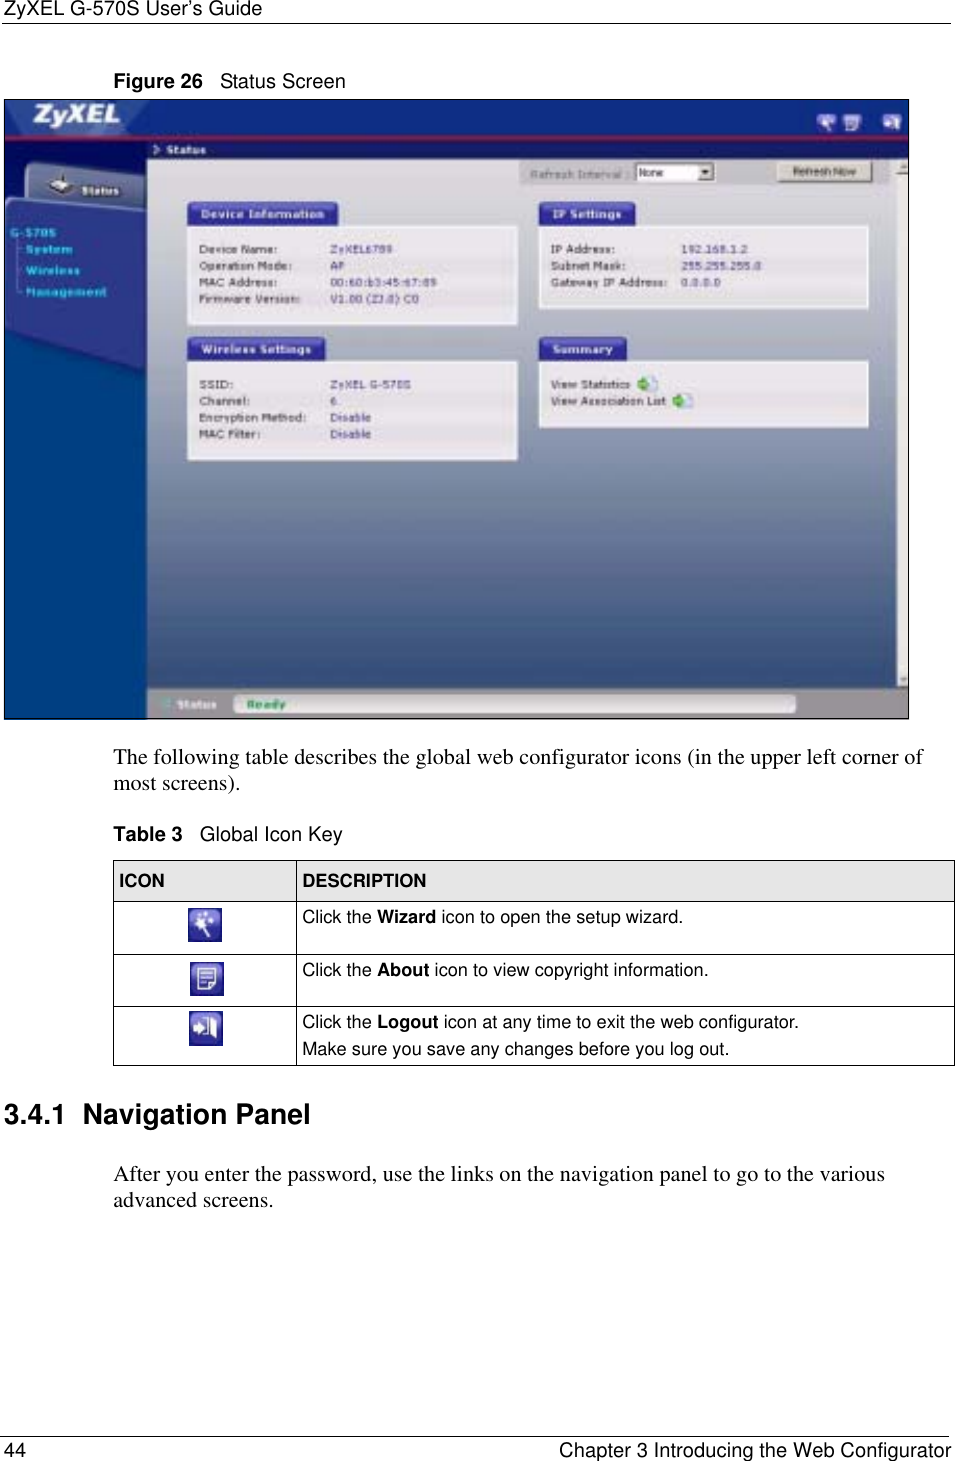 ZyXEL G-570S User’s Guide44 Chapter 3 Introducing the Web ConfiguratorFigure 26   Status ScreenThe following table describes the global web configurator icons (in the upper left corner of most screens).3.4.1  Navigation PanelAfter you enter the password, use the links on the navigation panel to go to the various advanced screens.  Table 3   Global Icon KeyICON DESCRIPTIONClick the Wizard icon to open the setup wizard. Click the About icon to view copyright information.Click the Logout icon at any time to exit the web configurator.Make sure you save any changes before you log out.